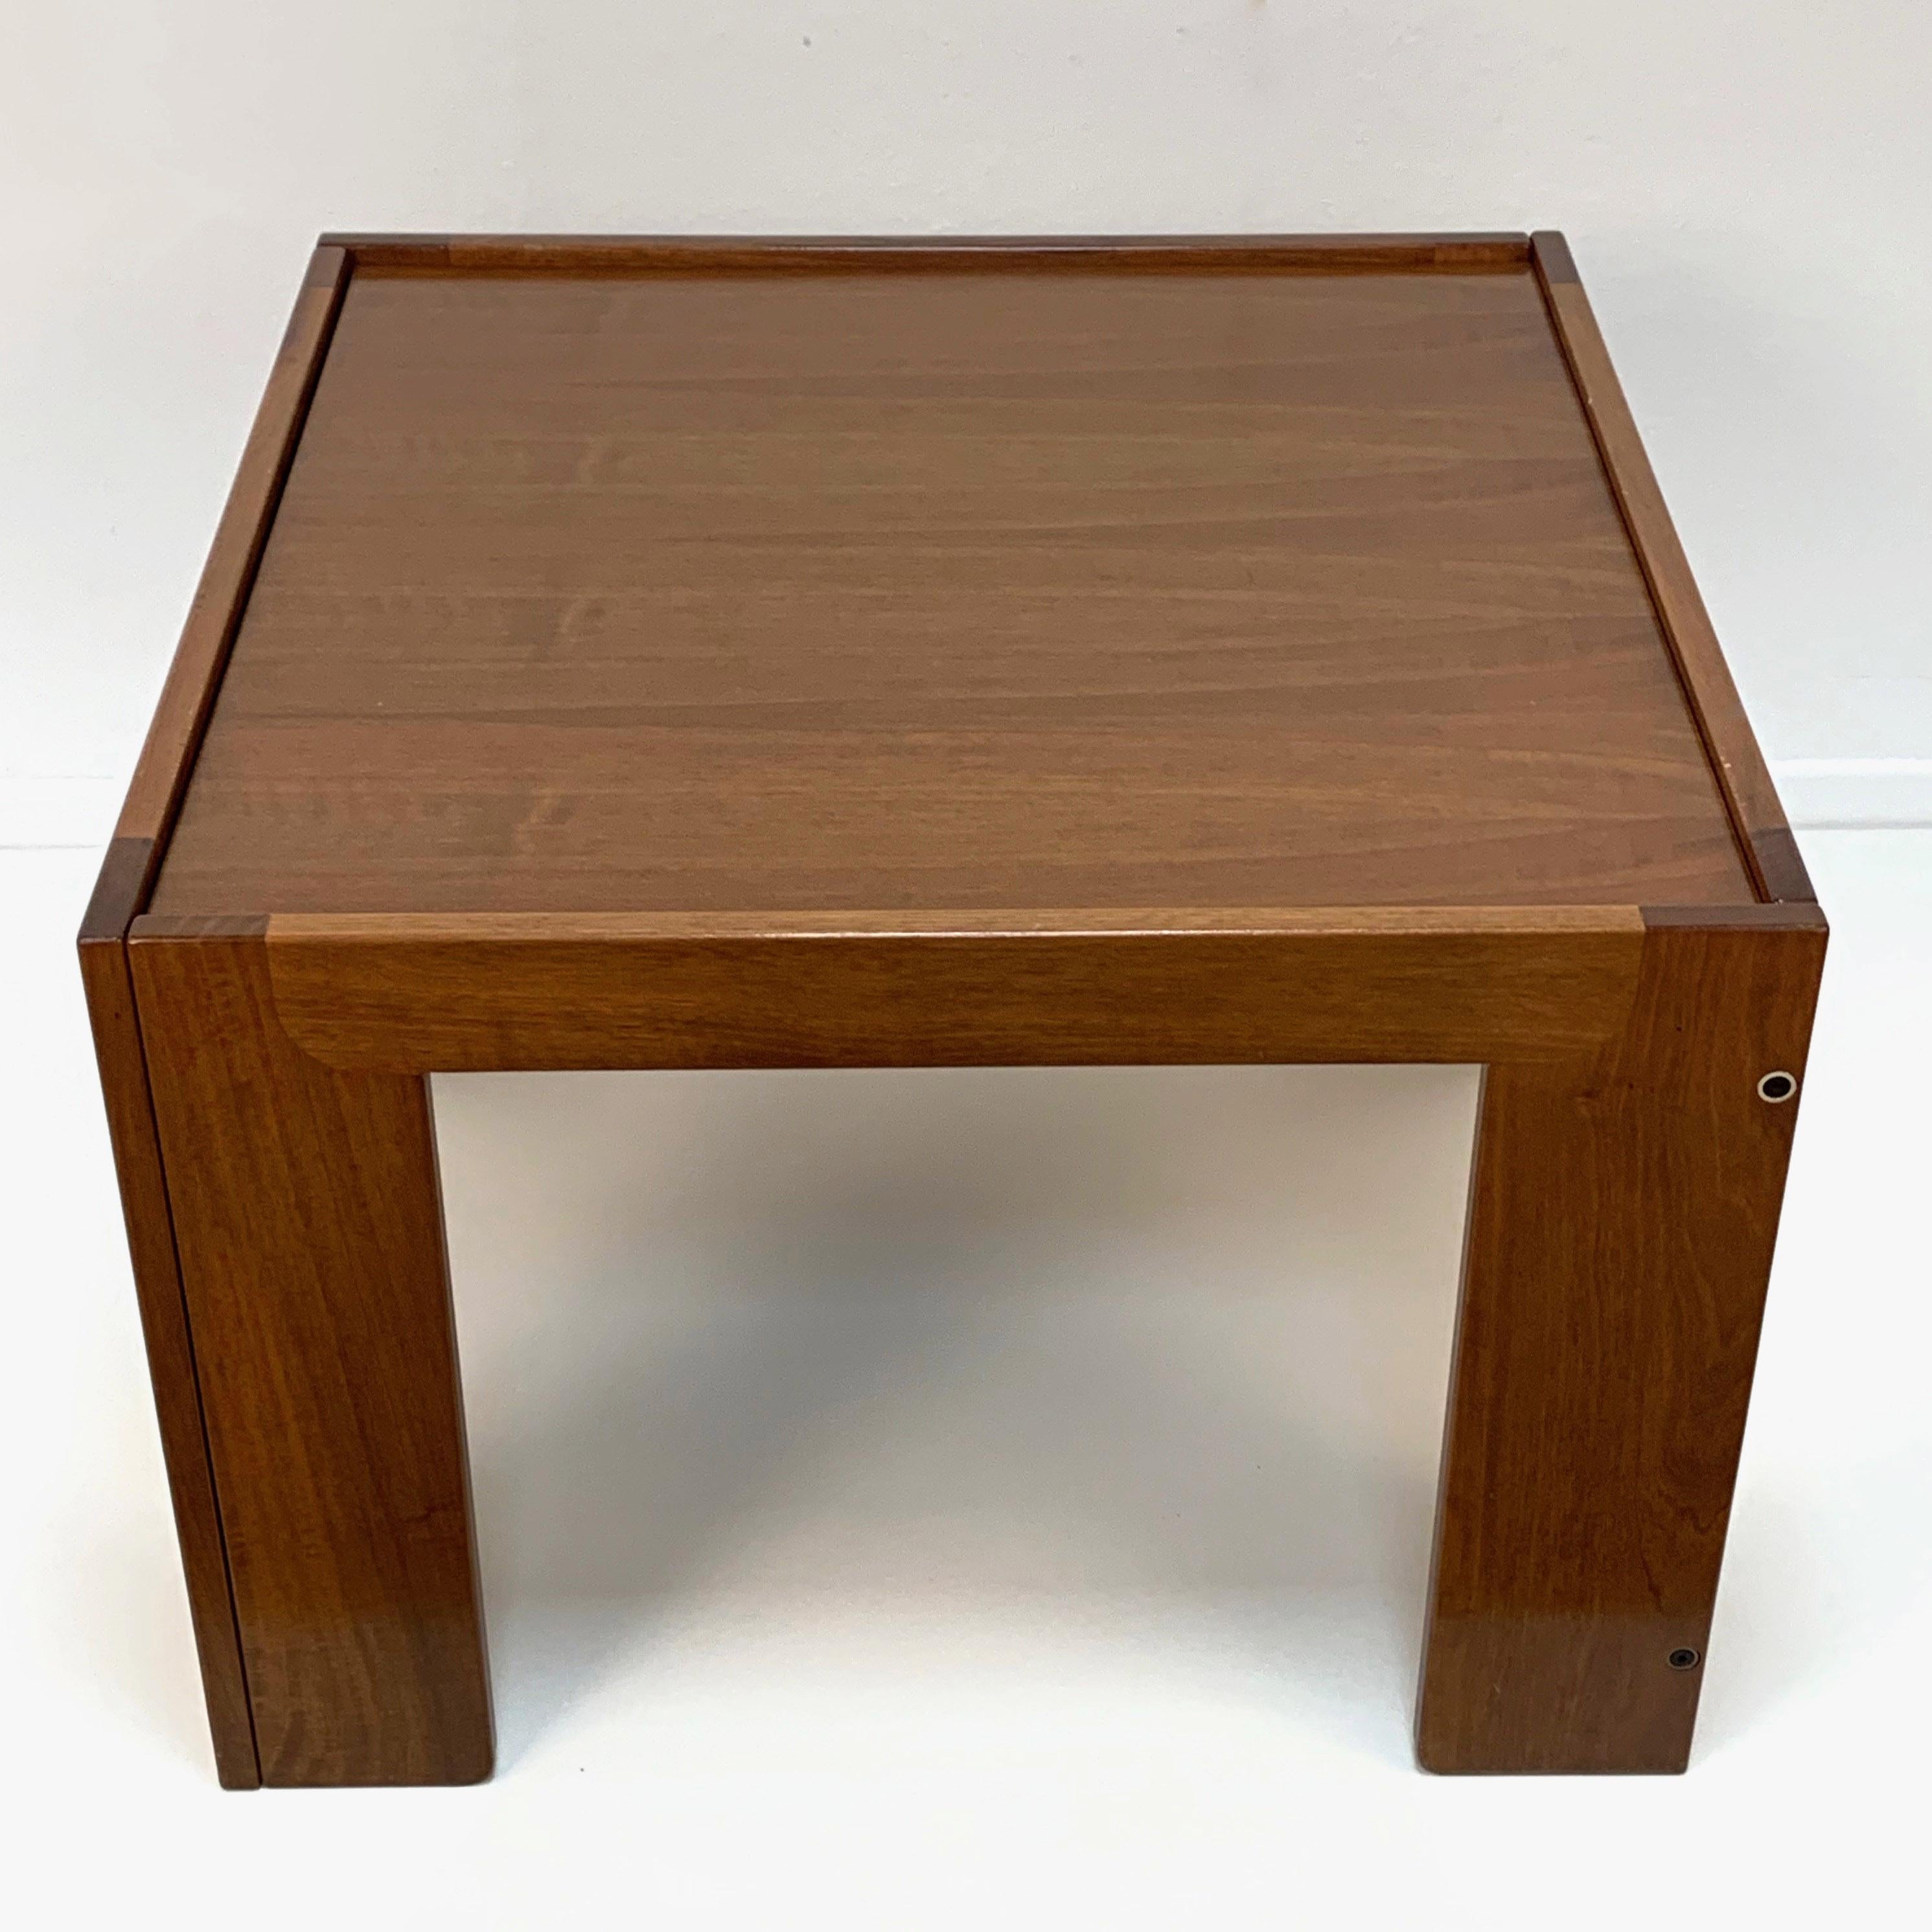 Wood Afra and Tobia Scarpa Midcentury Squared Italian Coffee Table for Cassina, 1960s